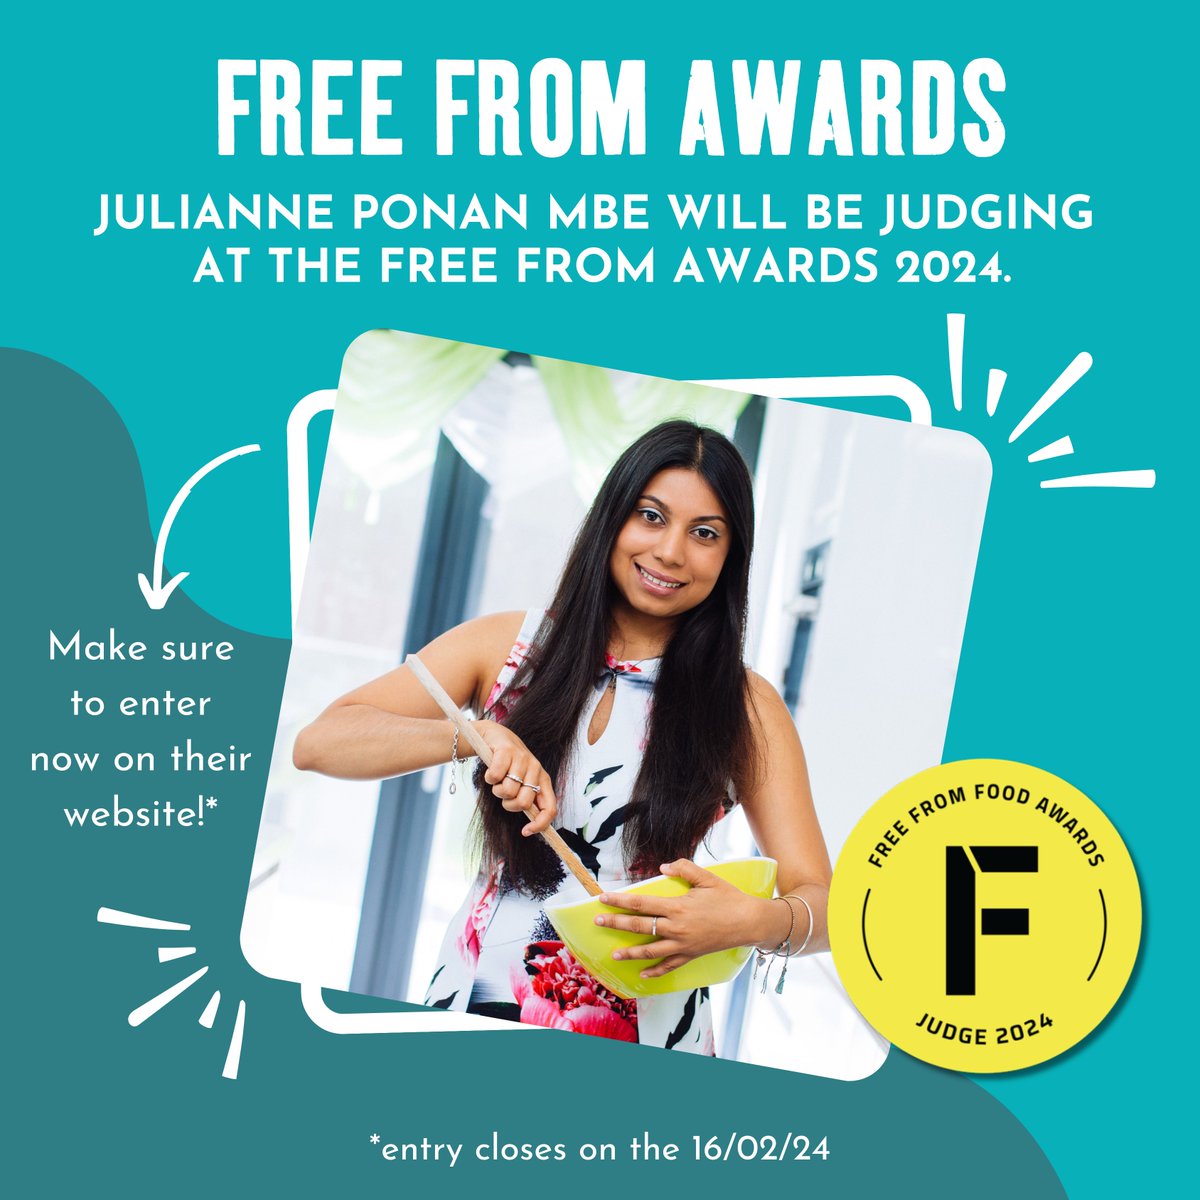 Our founder @JuliannePonan will be judging the @FFFoodAwards! We are very excited about this years awards and cannot wait to see all of the entries this year. You have two more days to enter, follow this link to enter your product now - freefromfoodawards.co.uk/categories/ #FFFA #awards